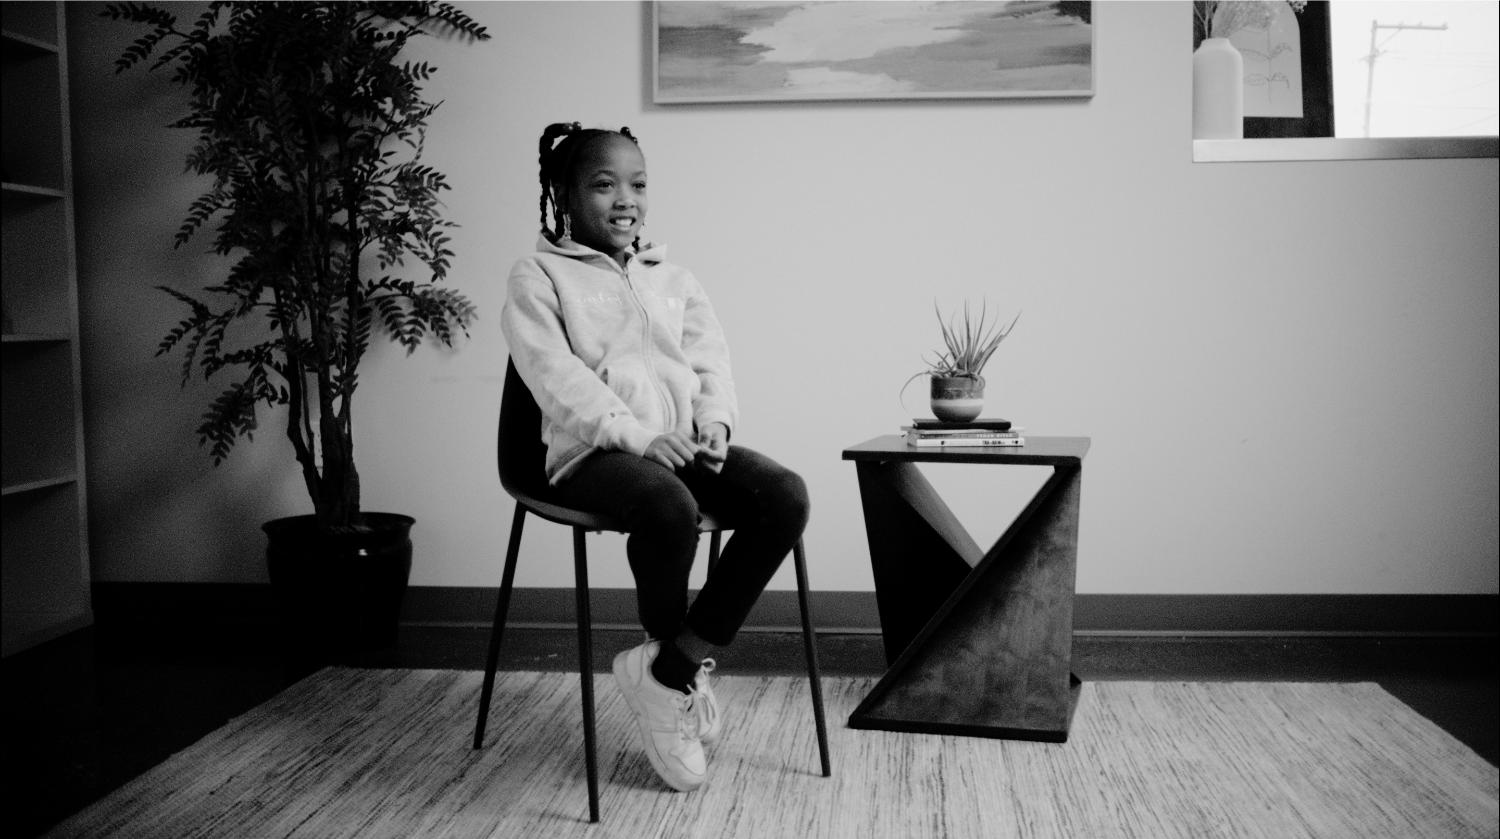 Mesiah, an elementary school-aged Black girl, sits in a chair and looks off camera to the right.